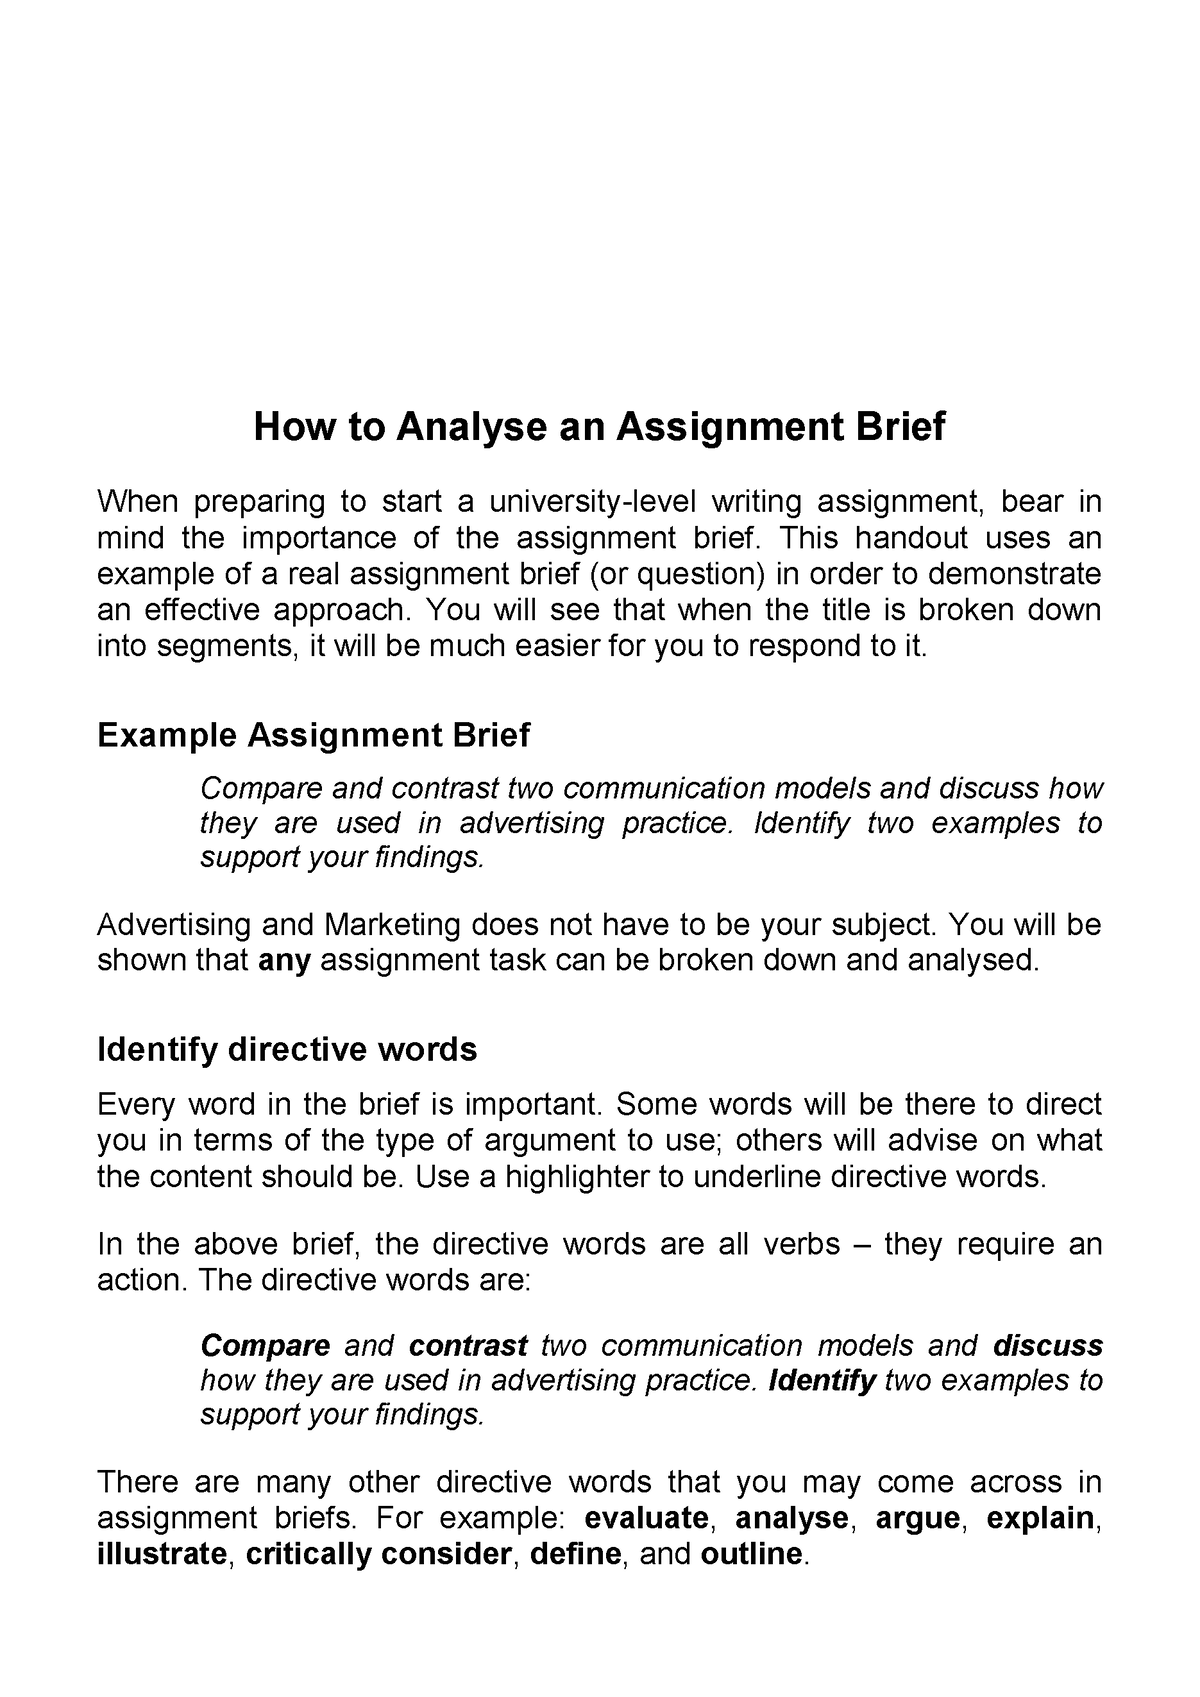 analyse meaning in assignment